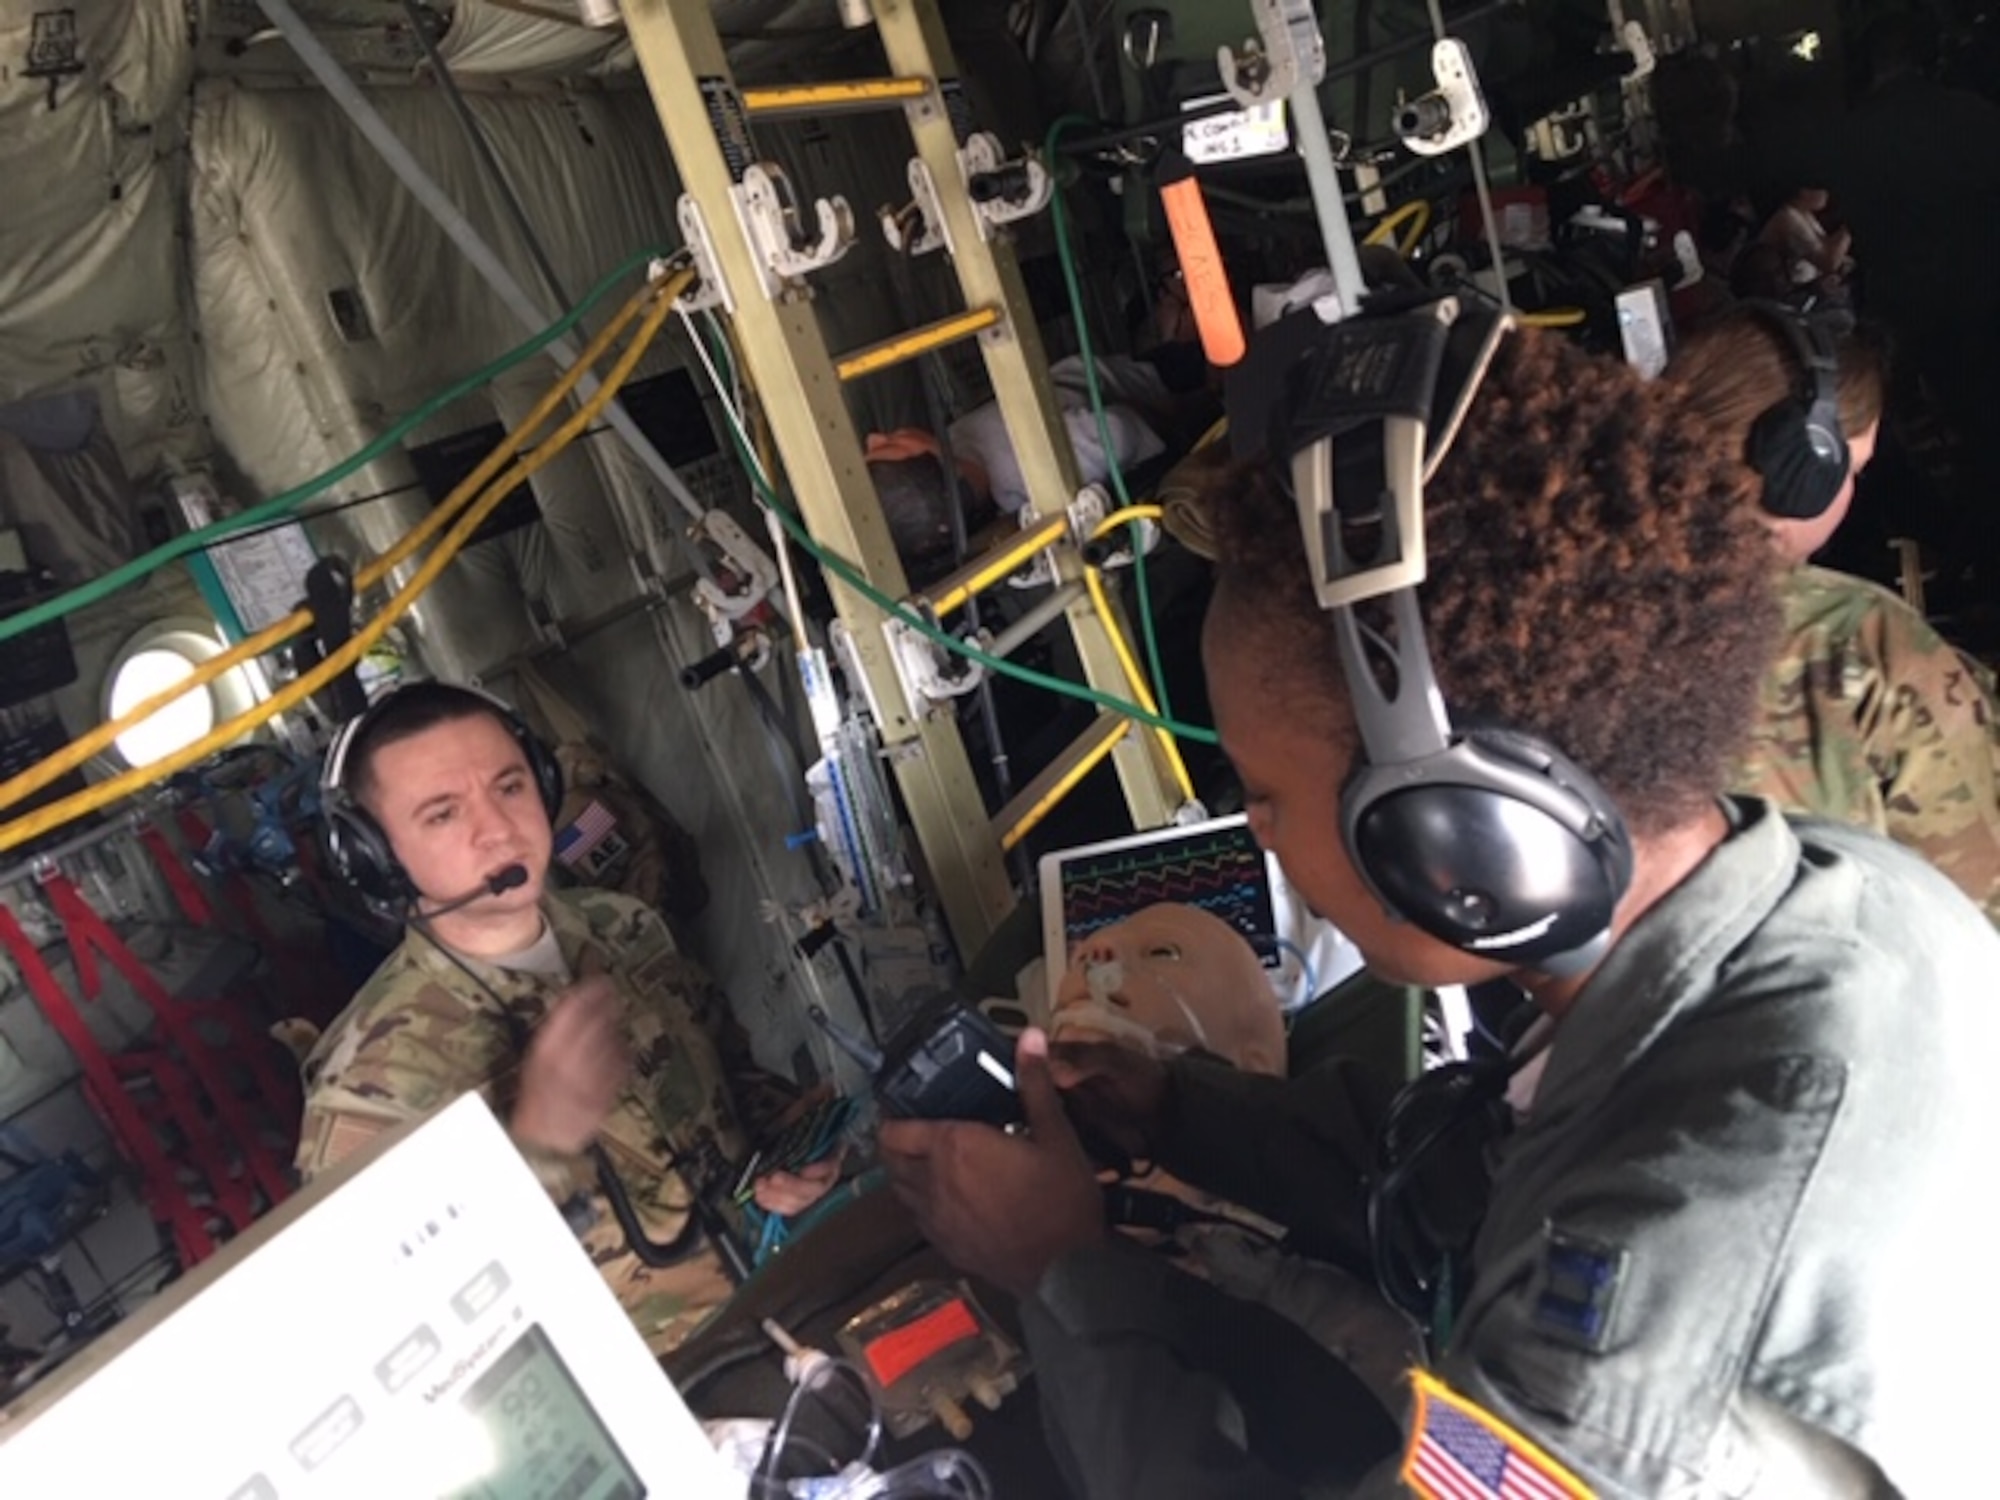 Capt. Thomas Ross, exercise trainer and an 81st Medical Group Critical Care Air Transport Team registered nurse (left) and Capt. Shartia Bowers, a CCATT registered nurse (right) work inside a C-130J Super Hercules aircraft during an exercise March 10, 2019, at Keesler Air Force Base, Miss., involving the Air Force Reseve Airmen of the 403rd Wing's 36th Aeromedical Evacuation Squadron and the 815th Airlift Squadron and active duty Air Force service members of the 81st MDG CCATT.  All three military units are at Keesler Air Force Base, Miss. (U.S. Air Force Photo by Lt. Col. Ryan Mihata).